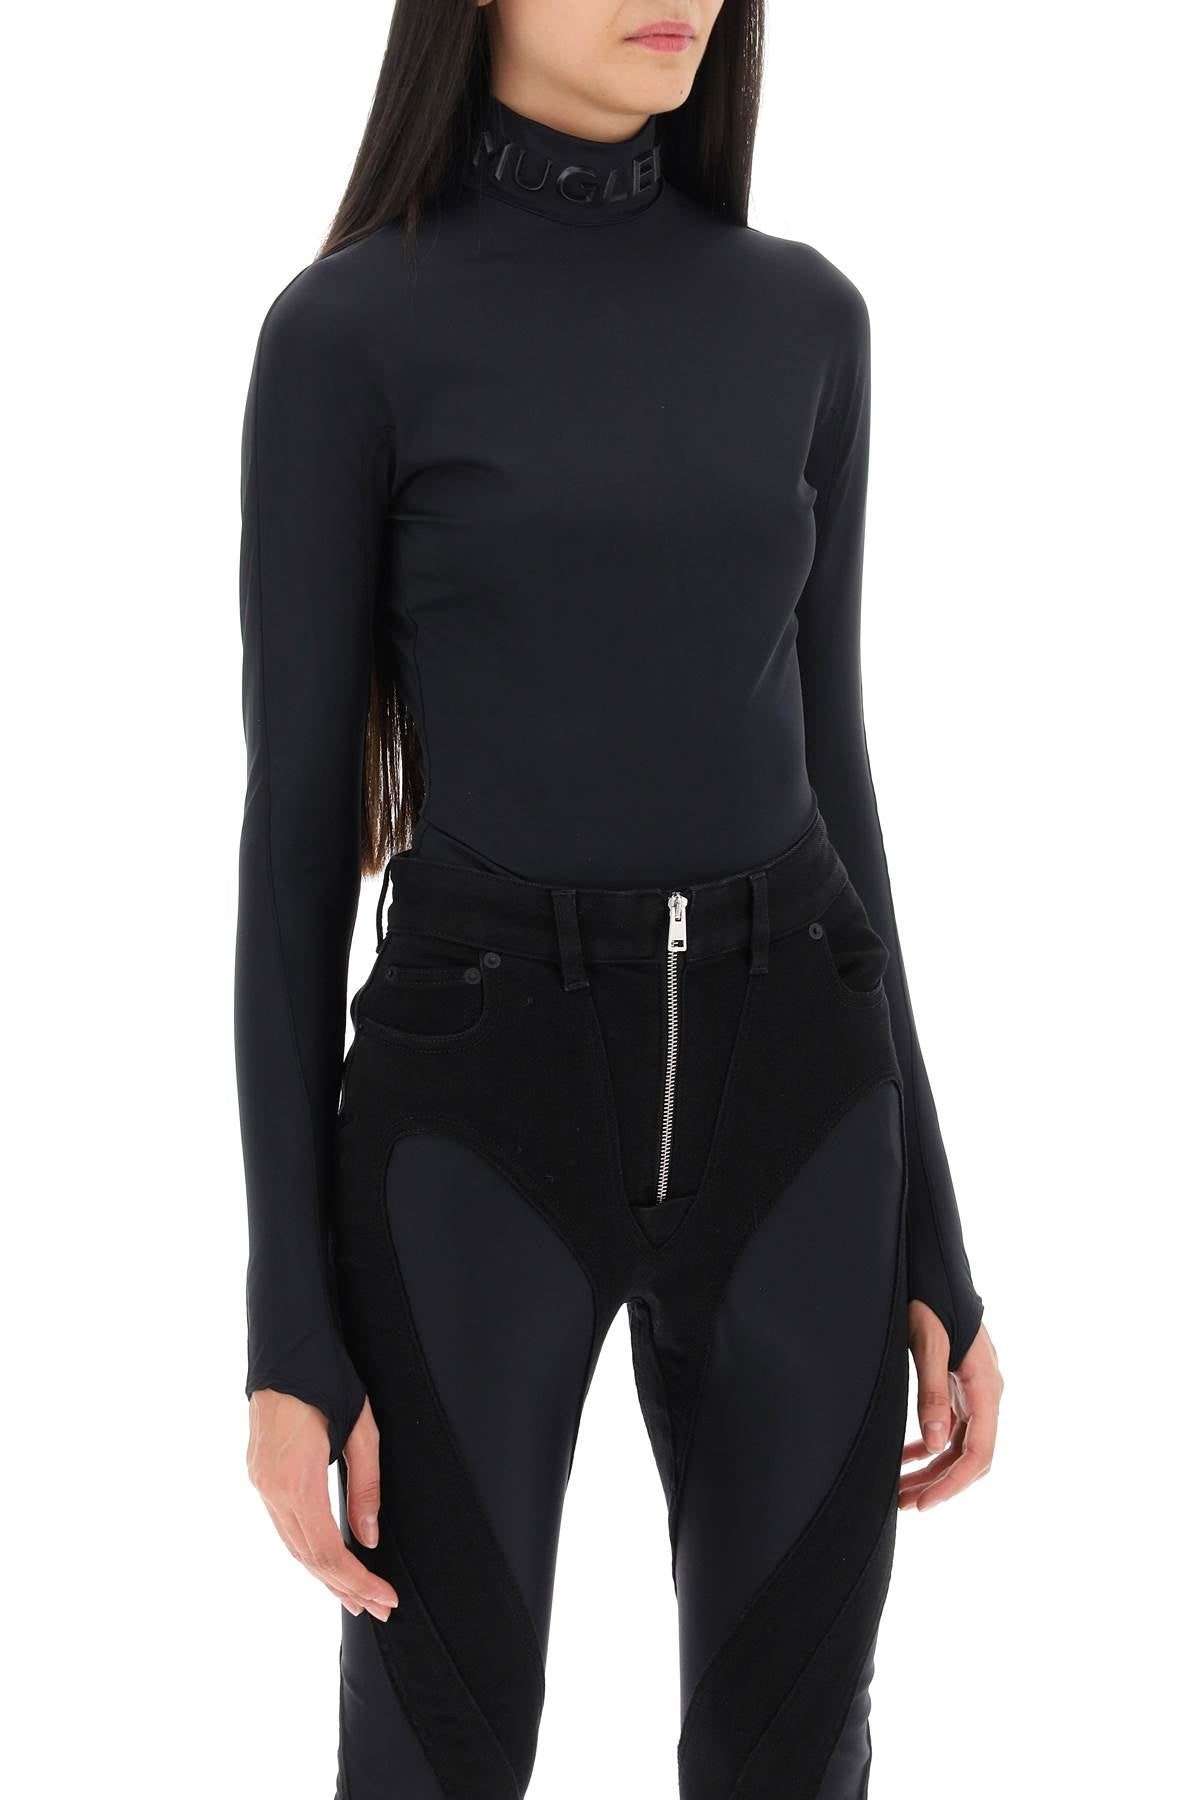 MUGLER Black Stand Collar Bodysuit with Second-Skin Effect for Women